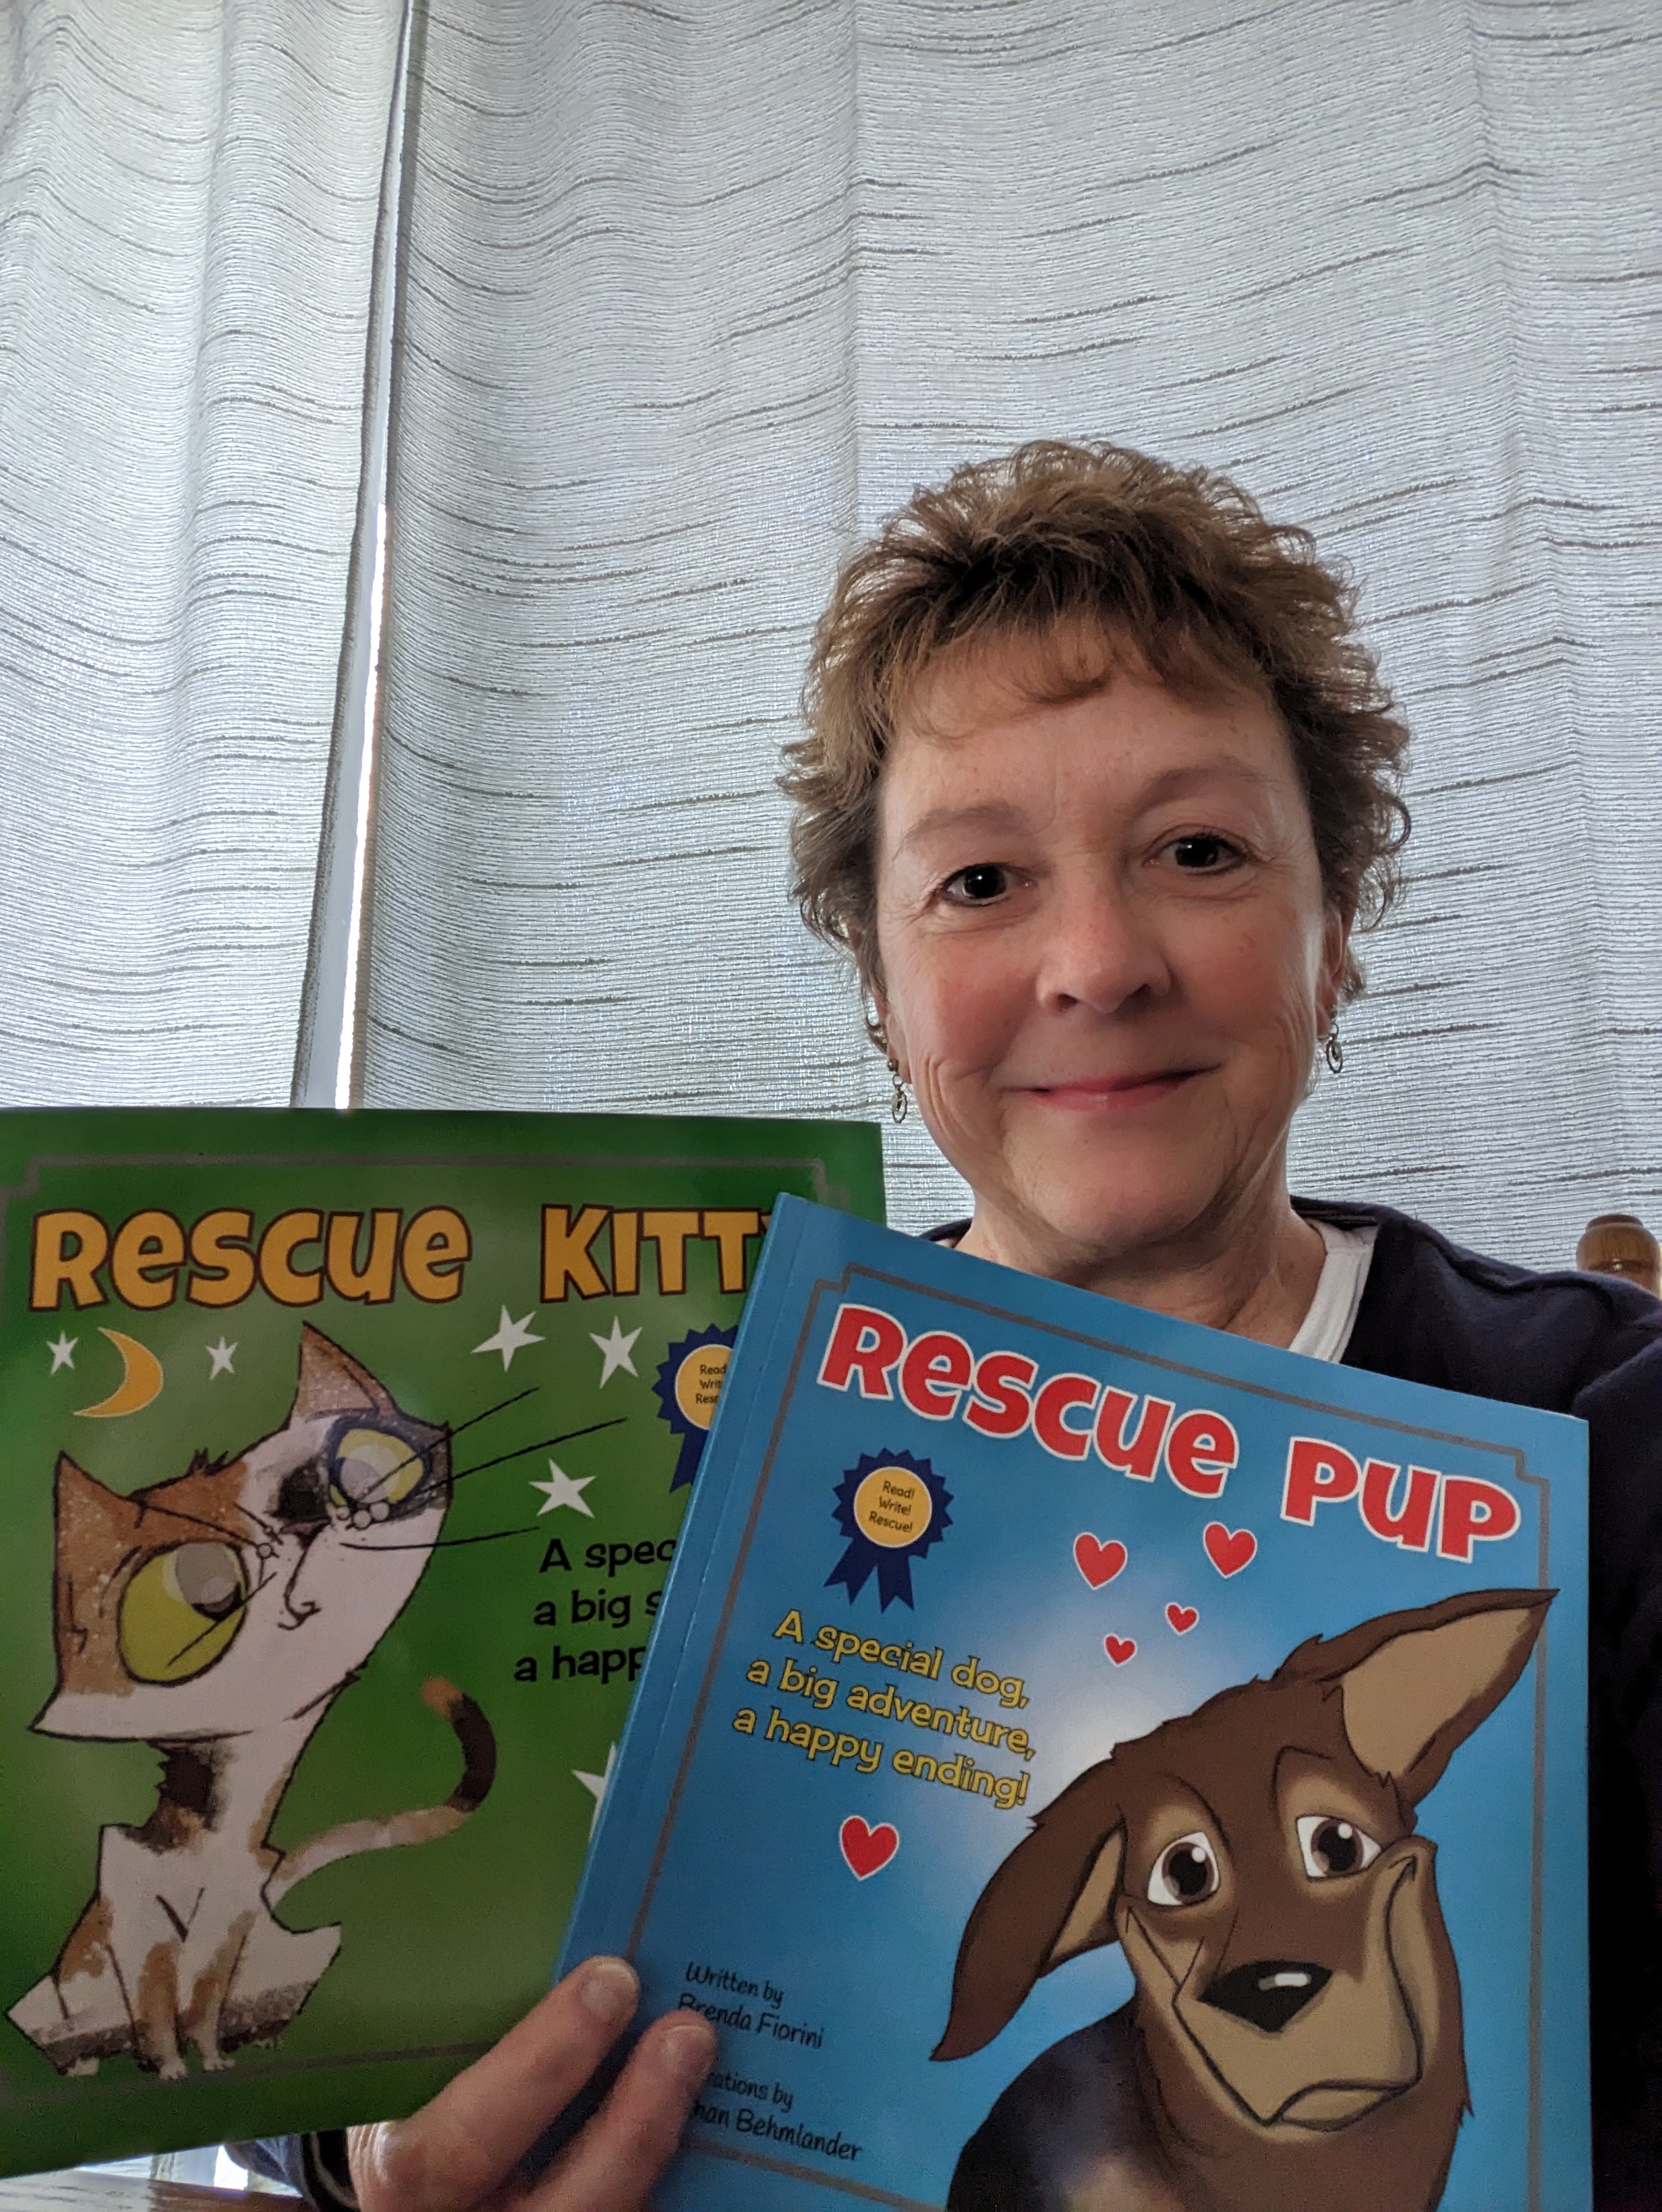 Photo of Brenda Fiorini smiling and holding copies of two books she has written: Rescue Kitty and Rescue Pup